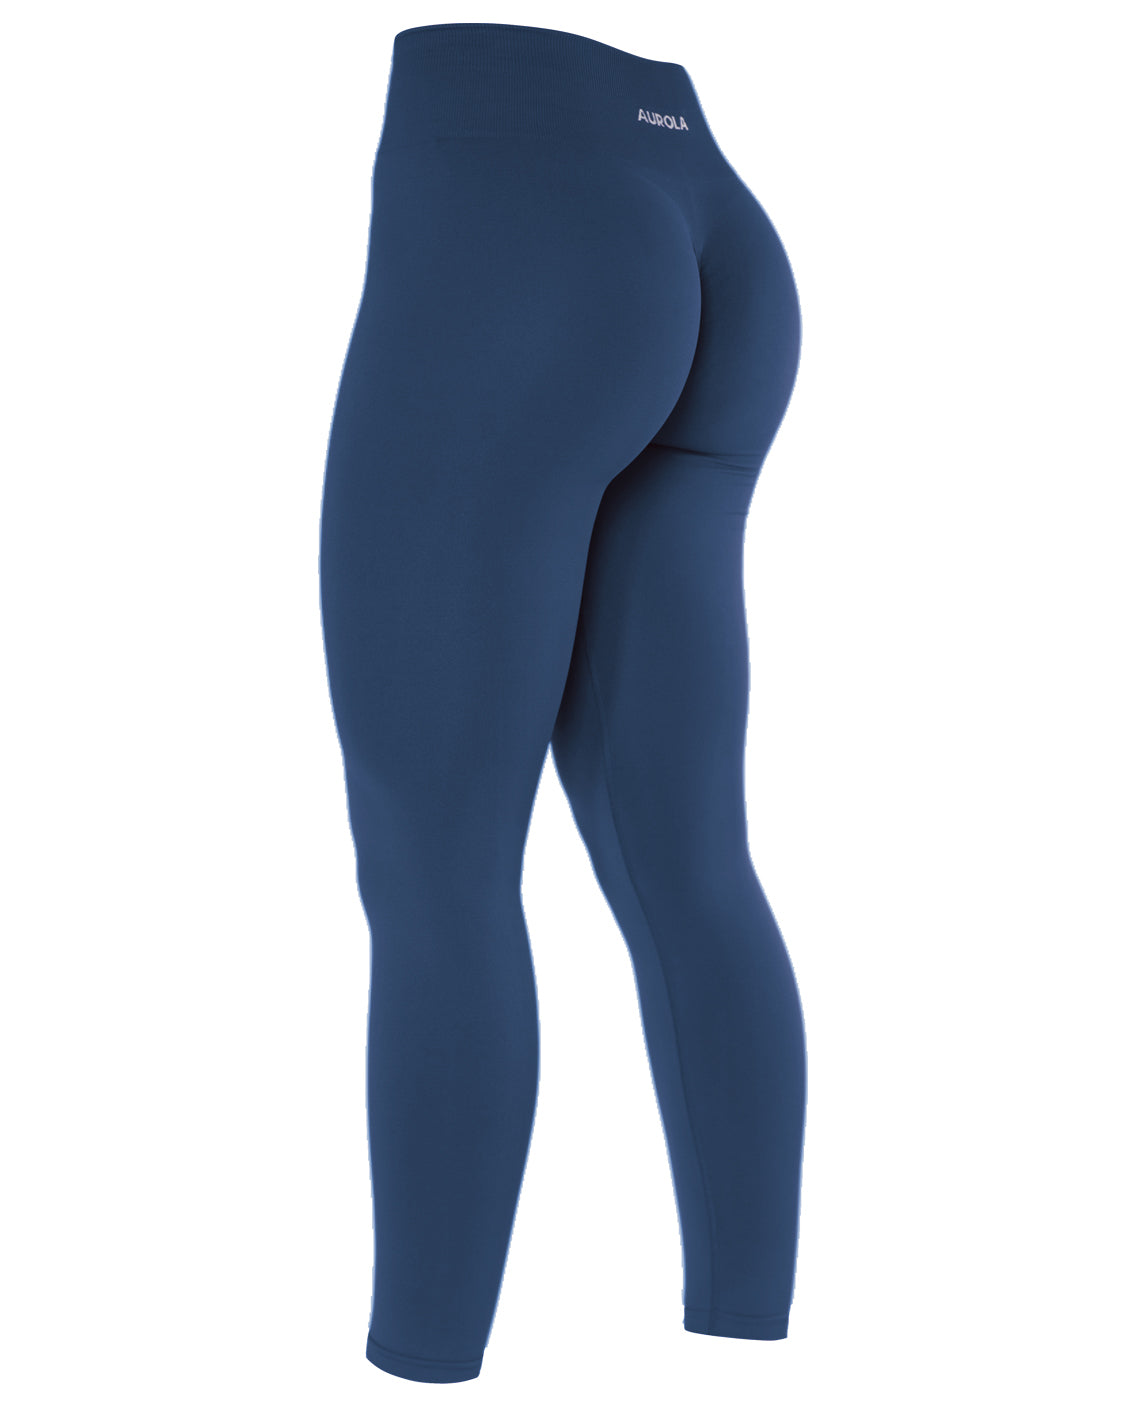 Prisma's leggings are light weight and comfortable. They are also epitomes  of affordability and style and one of the be…